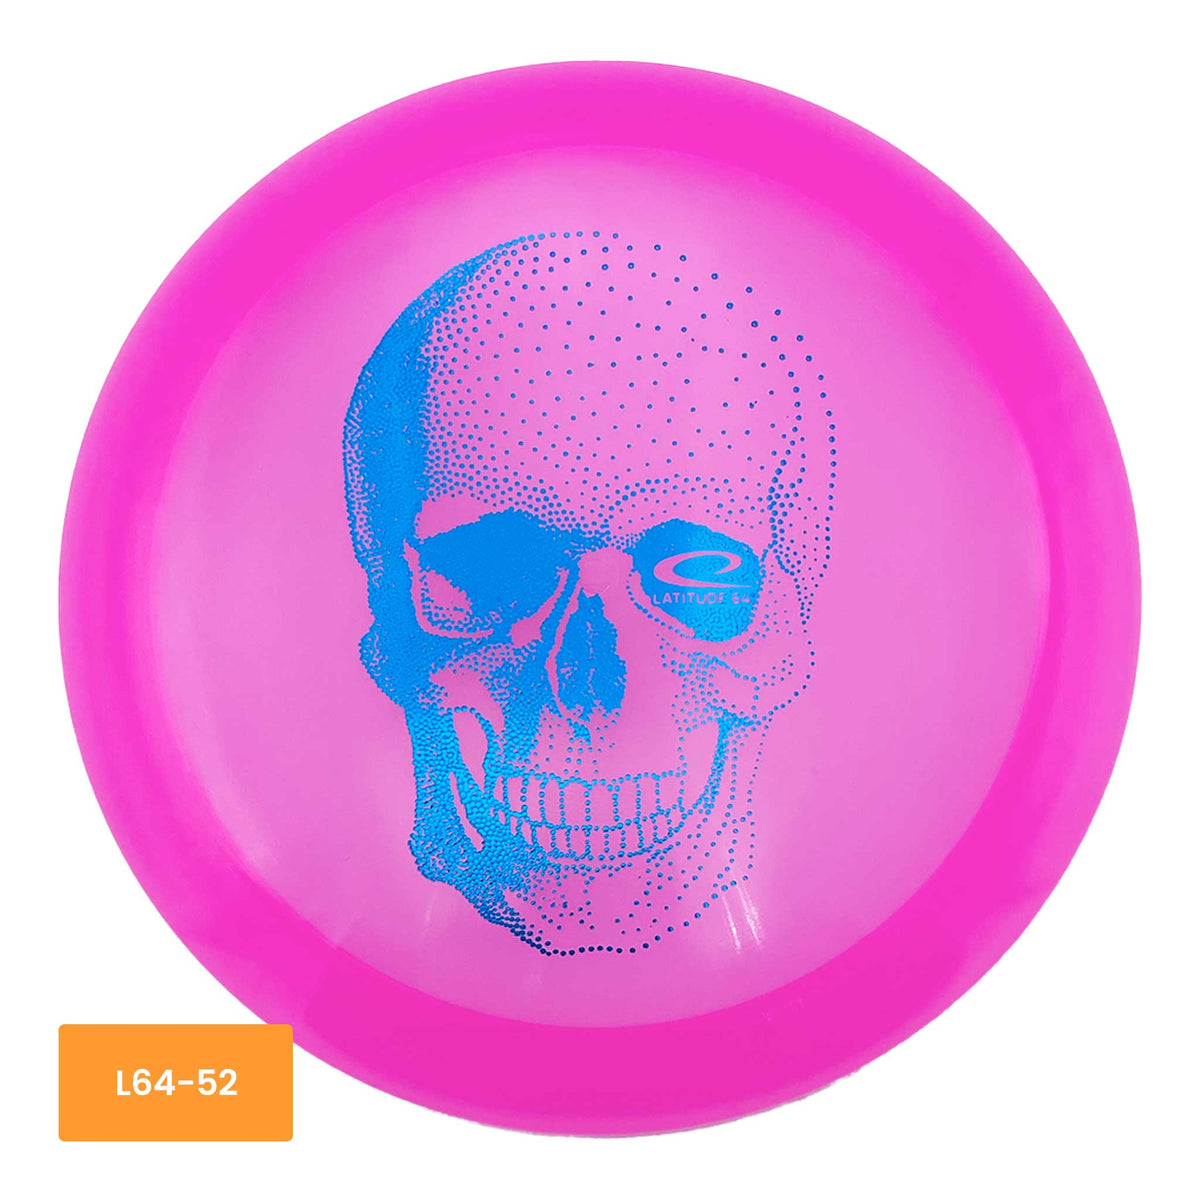 Latitude 64 Opto-X Musket distance driver - Pink